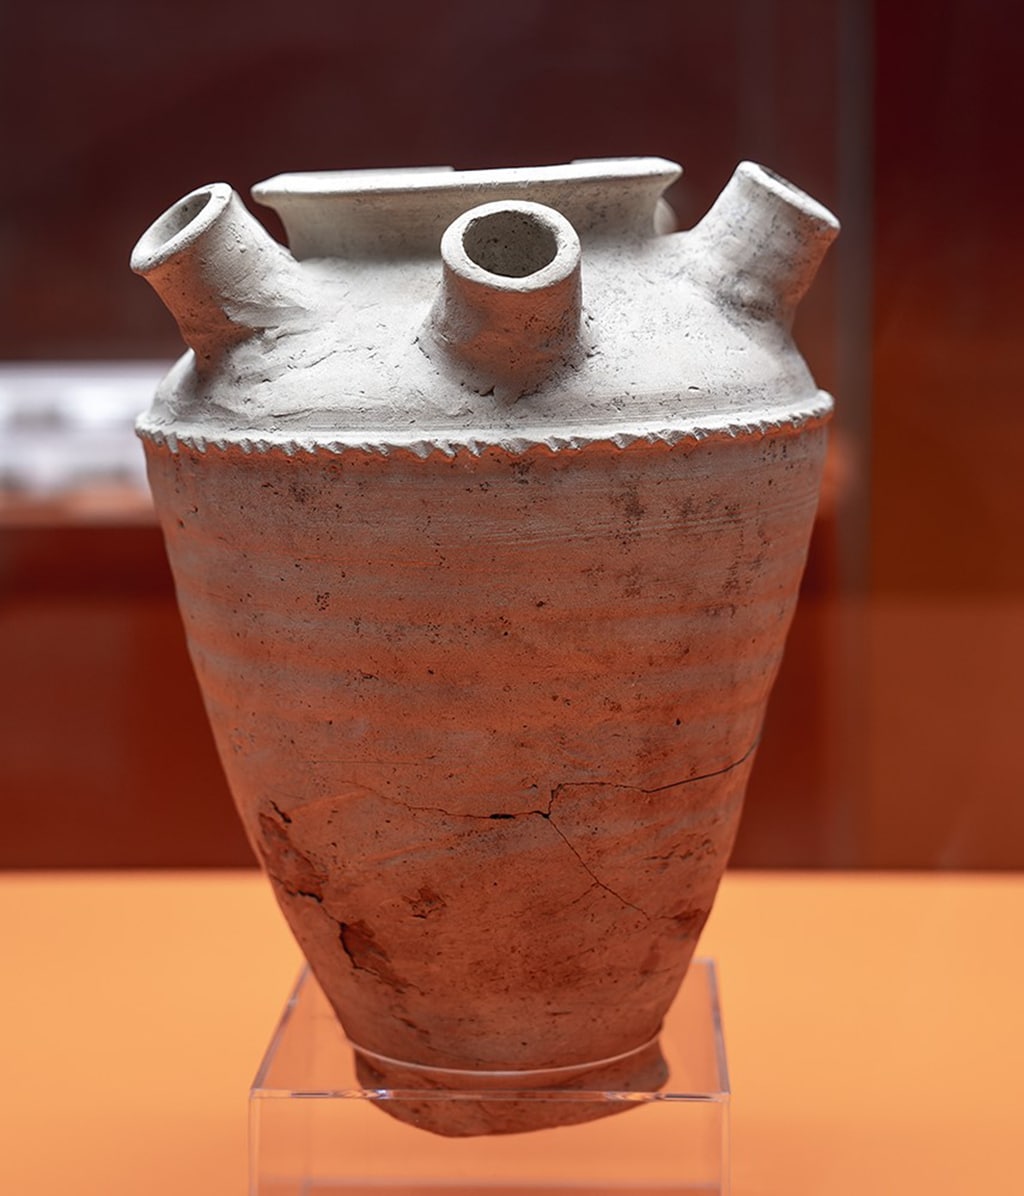 Basra's museum: Haven to 300 BC artifacts from various civilizations